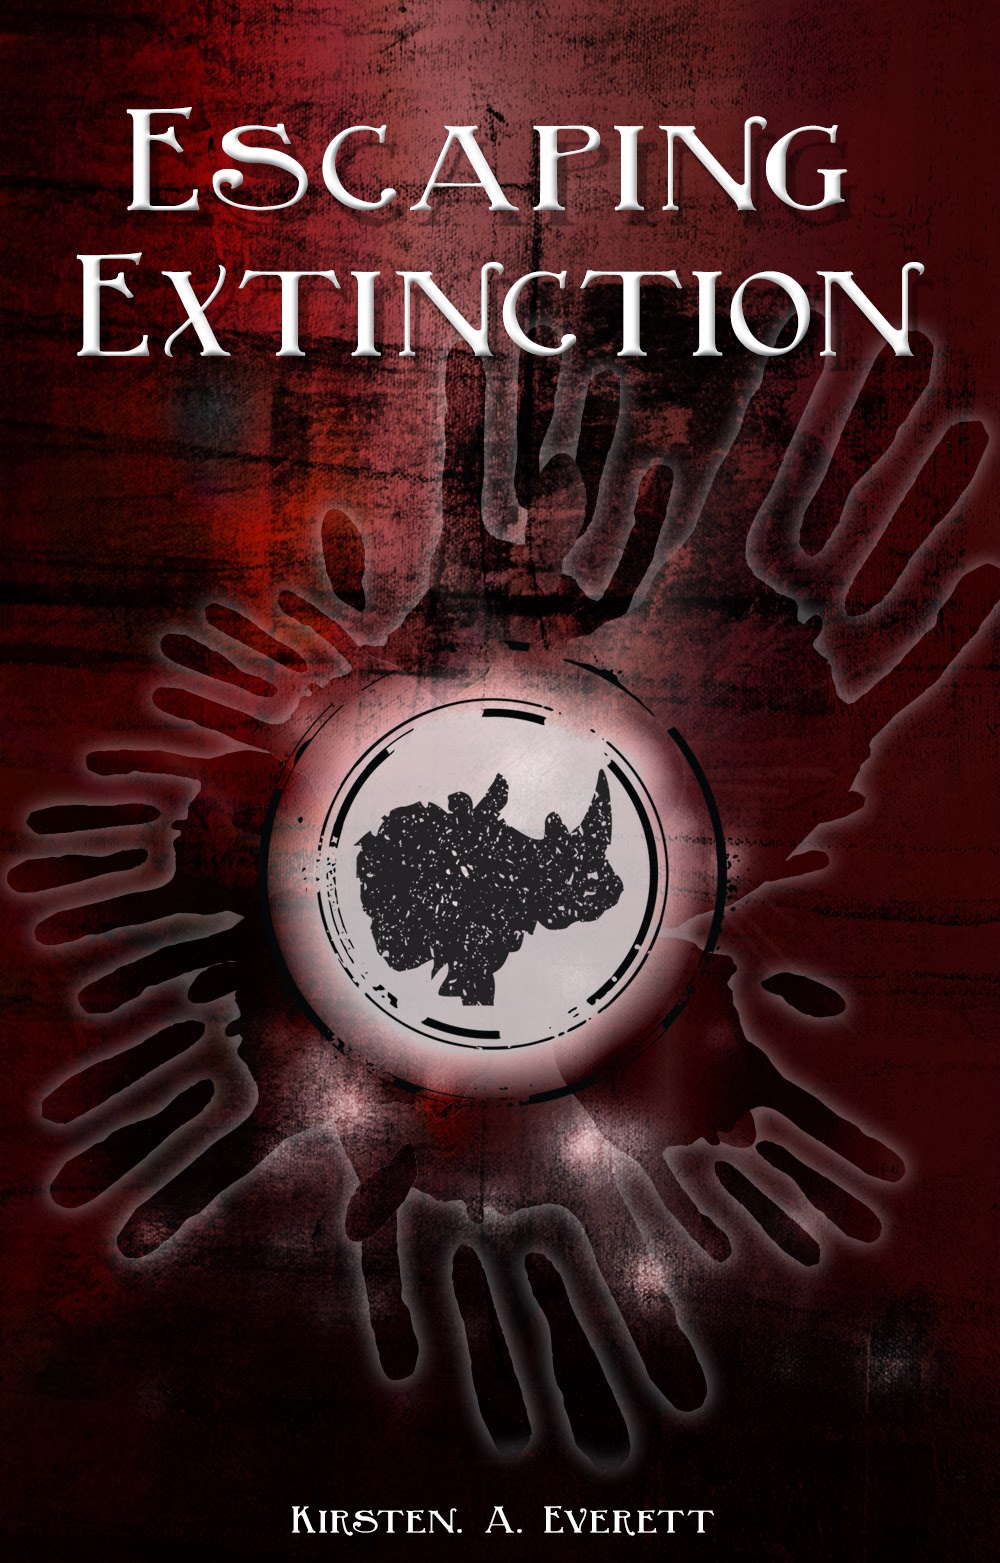 Escaping Extinction by Kirsten. A. Everett